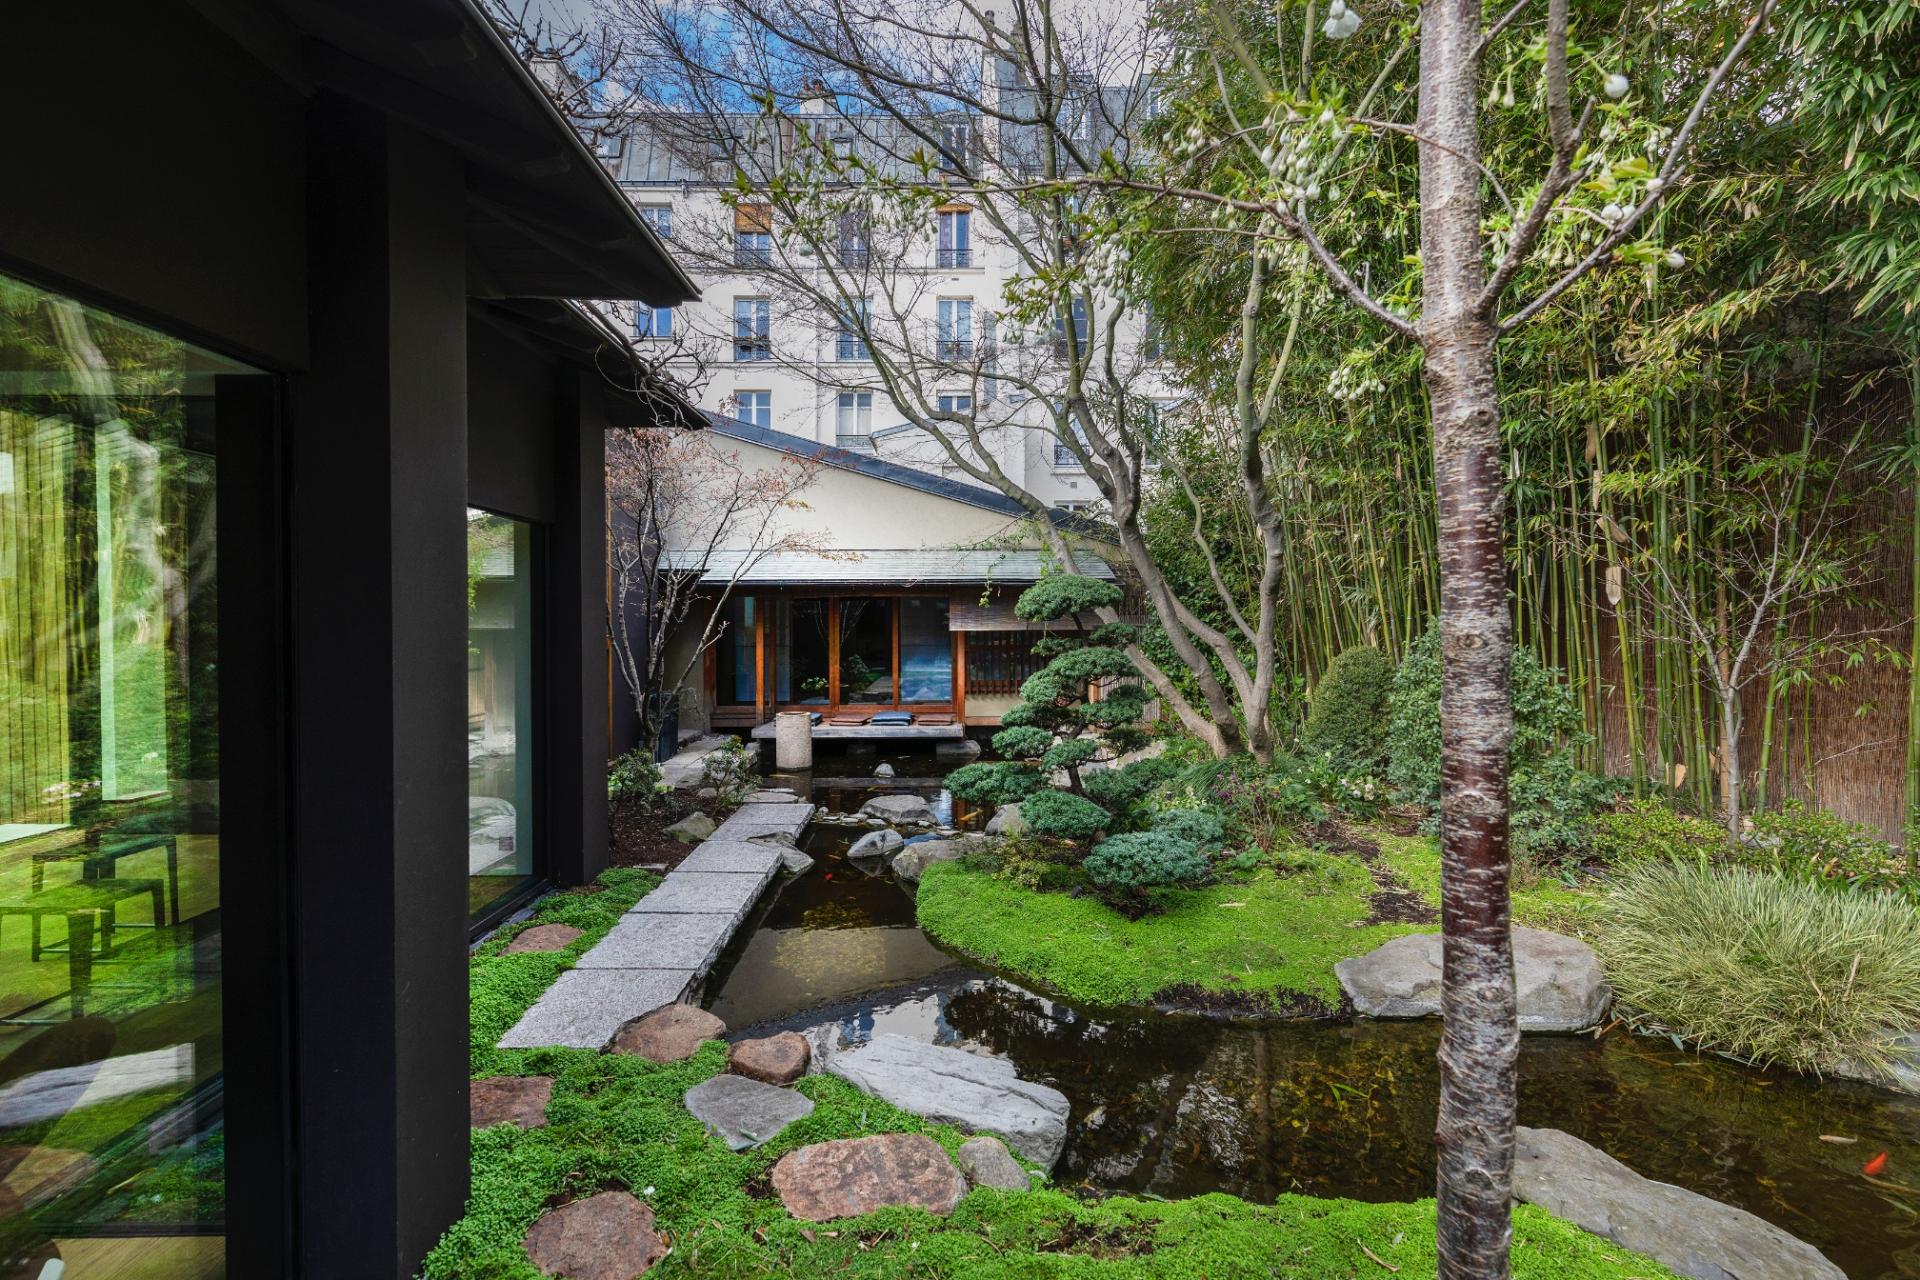 Japanese design legend Kenzo Takada’s 13,778 sq. ft. Parisian home is up for sale